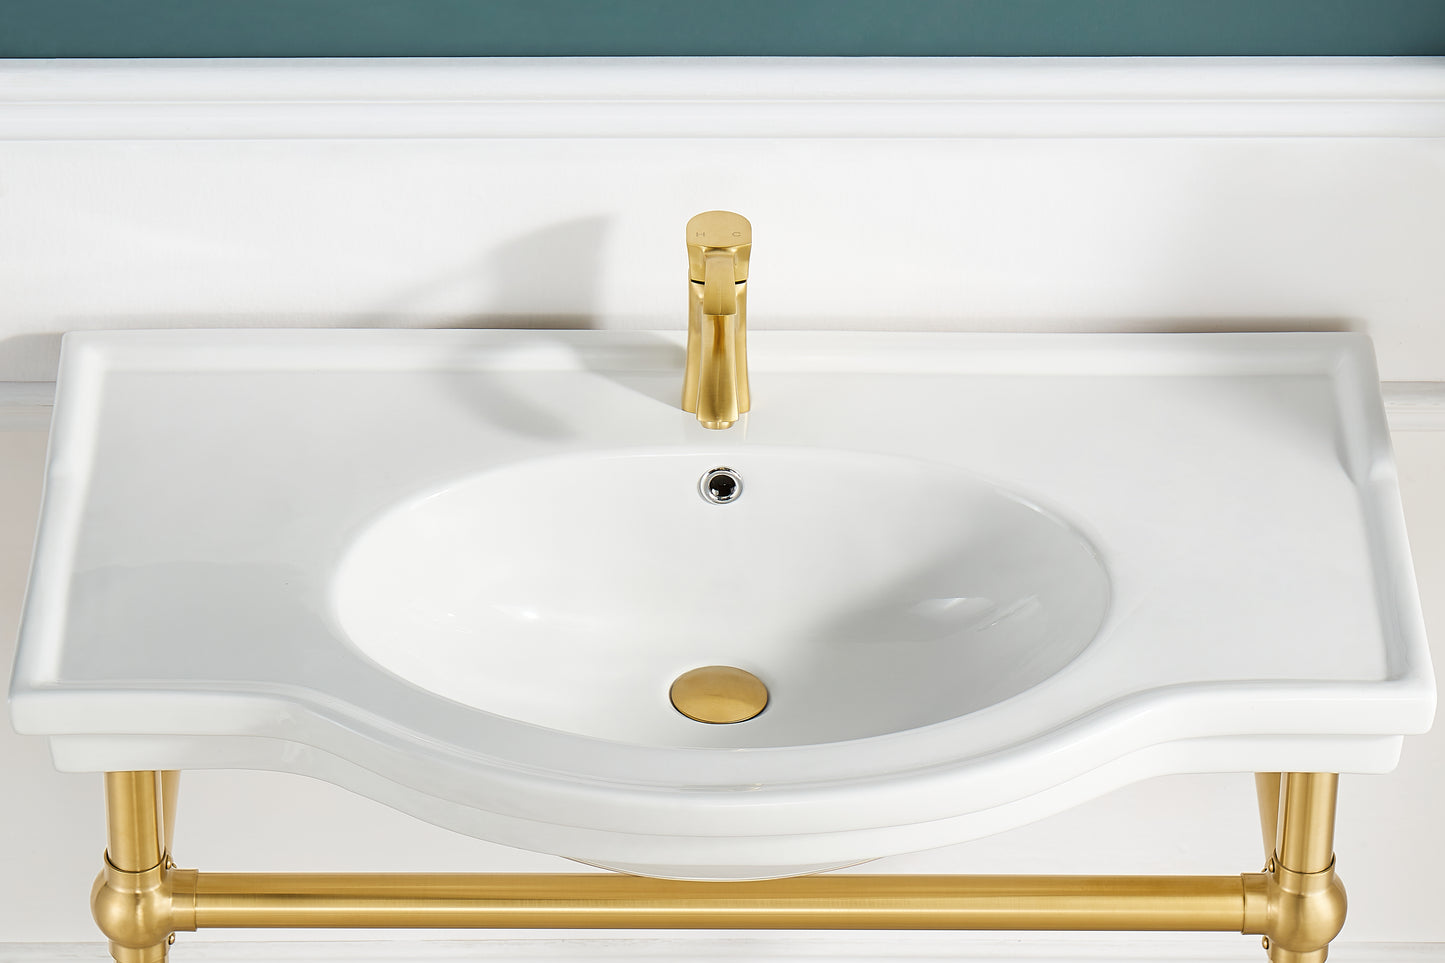 Viola 34.5 in. Console Sink with Ceramic Counter Top